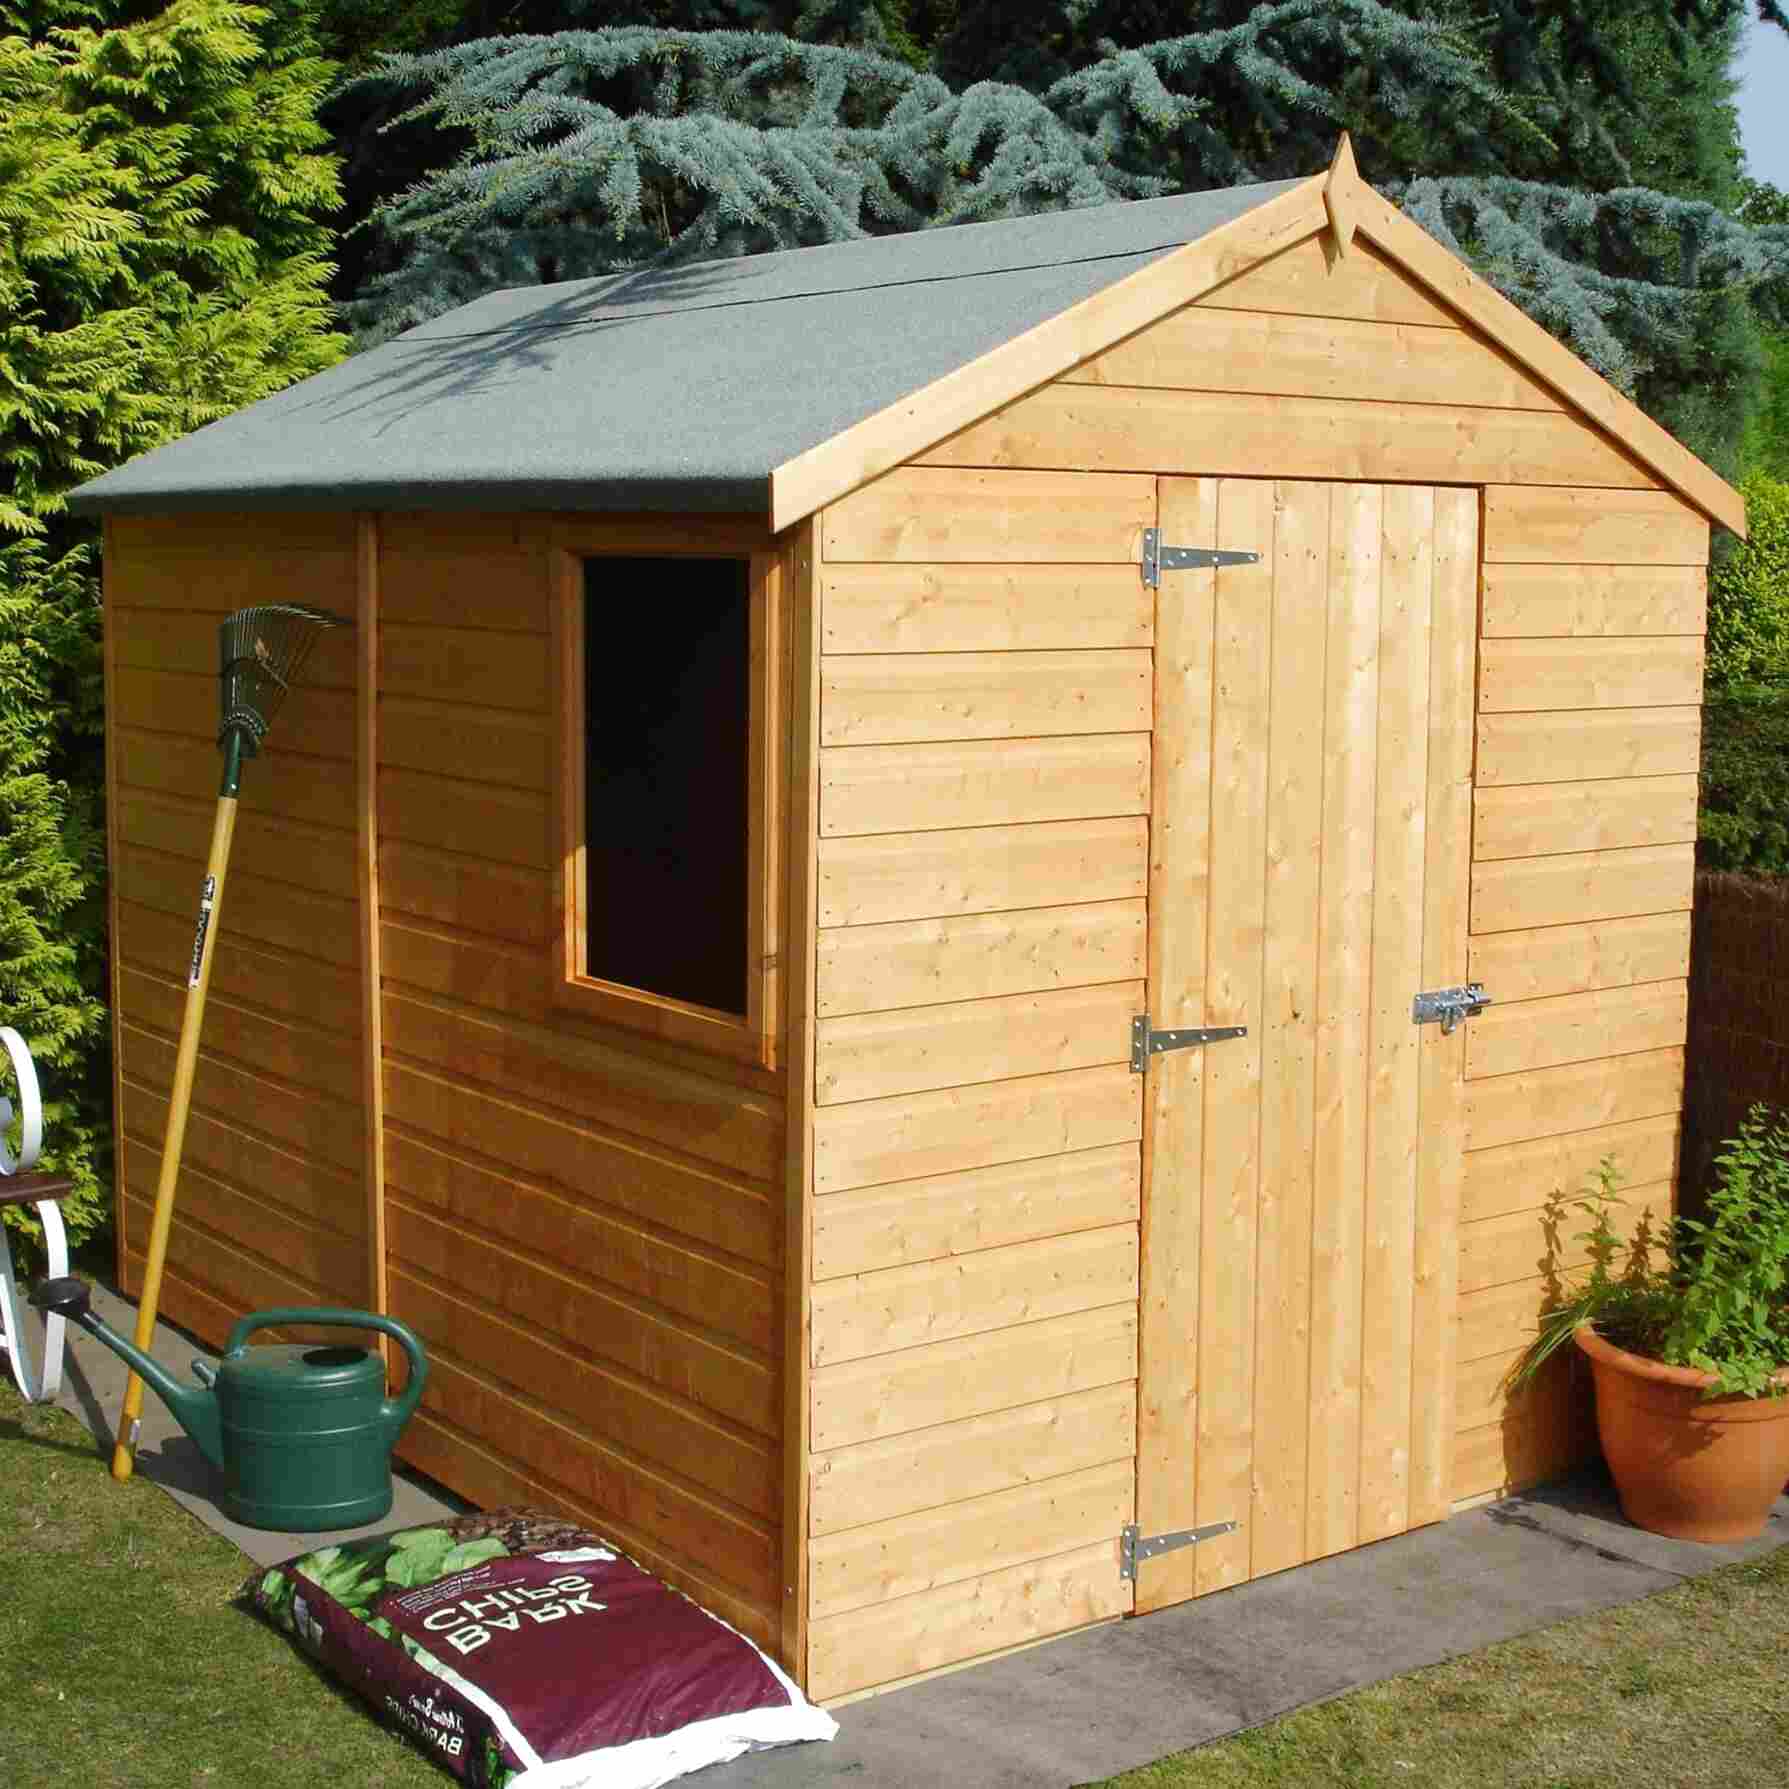 Wooden Shiplap Sheds for sale in UK View 56 bargains